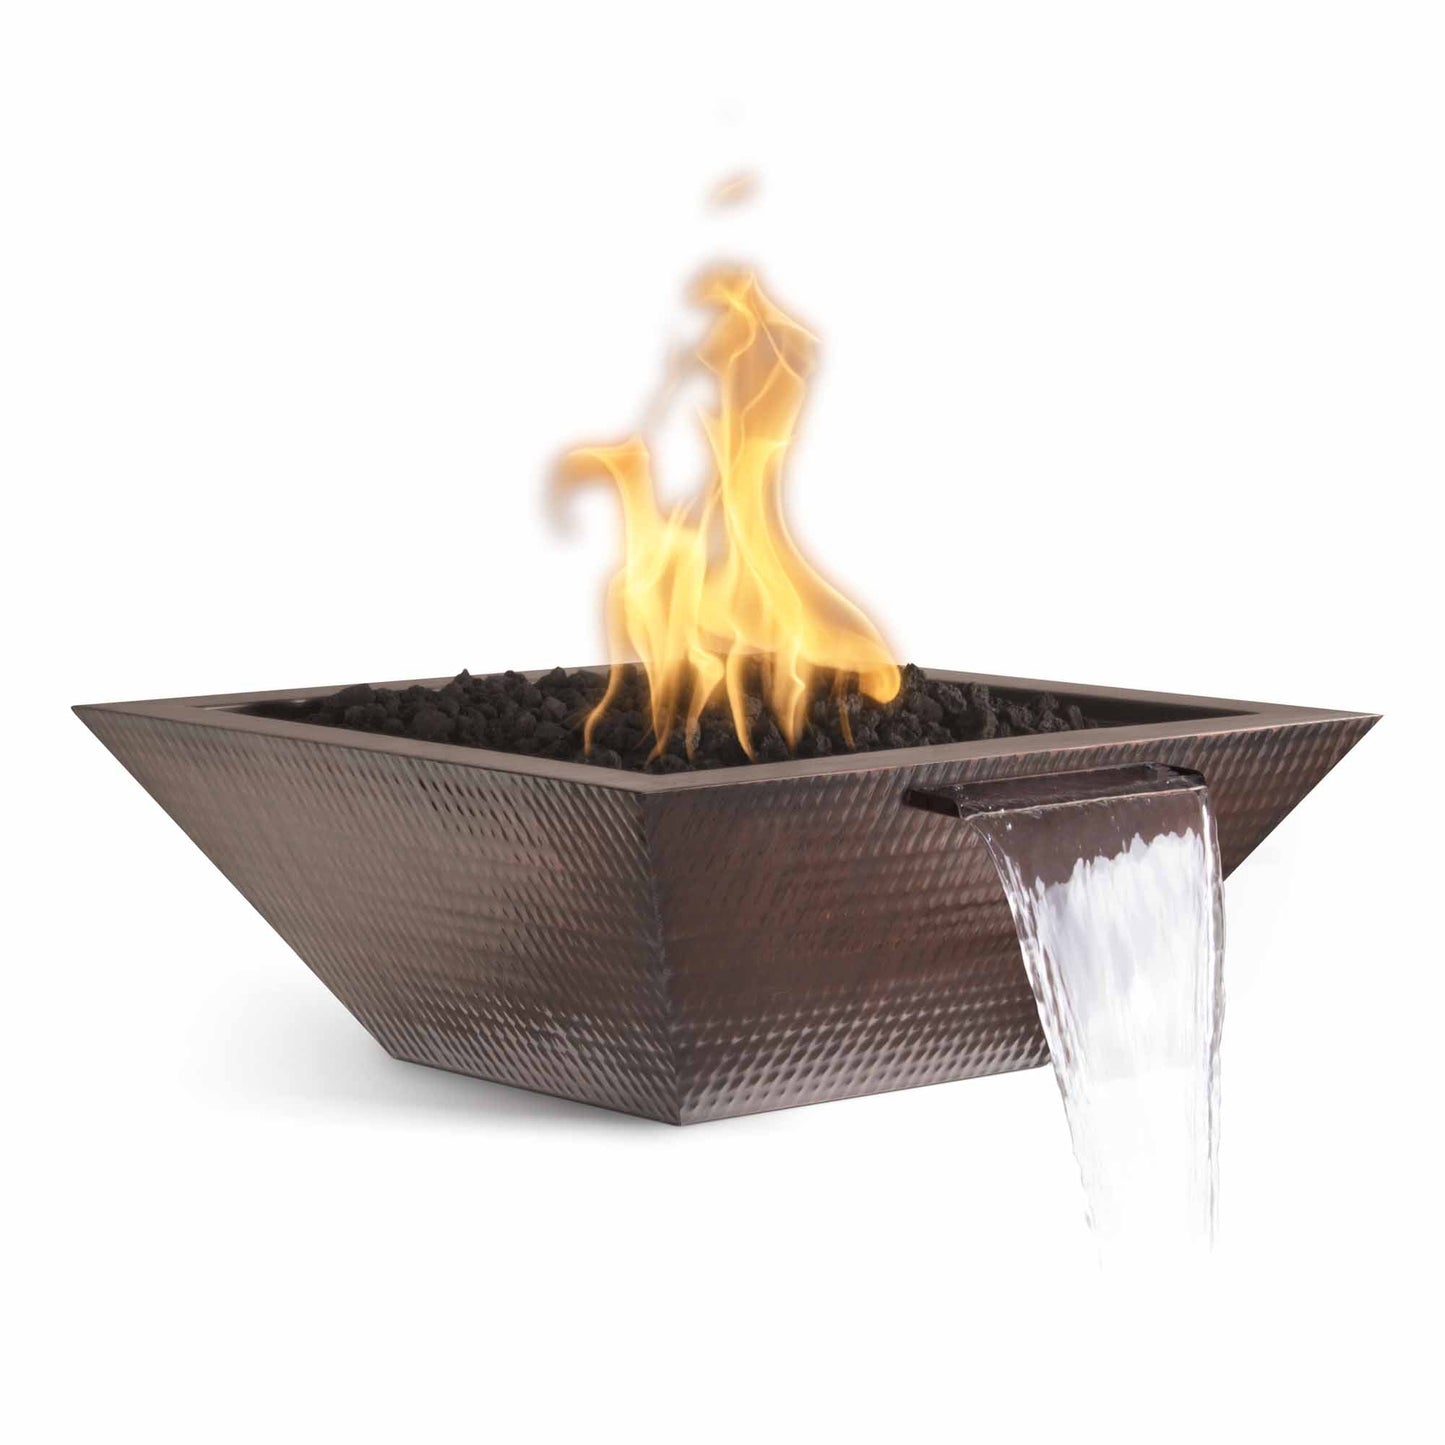 The Outdoor Plus Square Maya 36" Copper Liquid Propane Fire & Water Bowl with Match Lit with Flame Sense Ignition